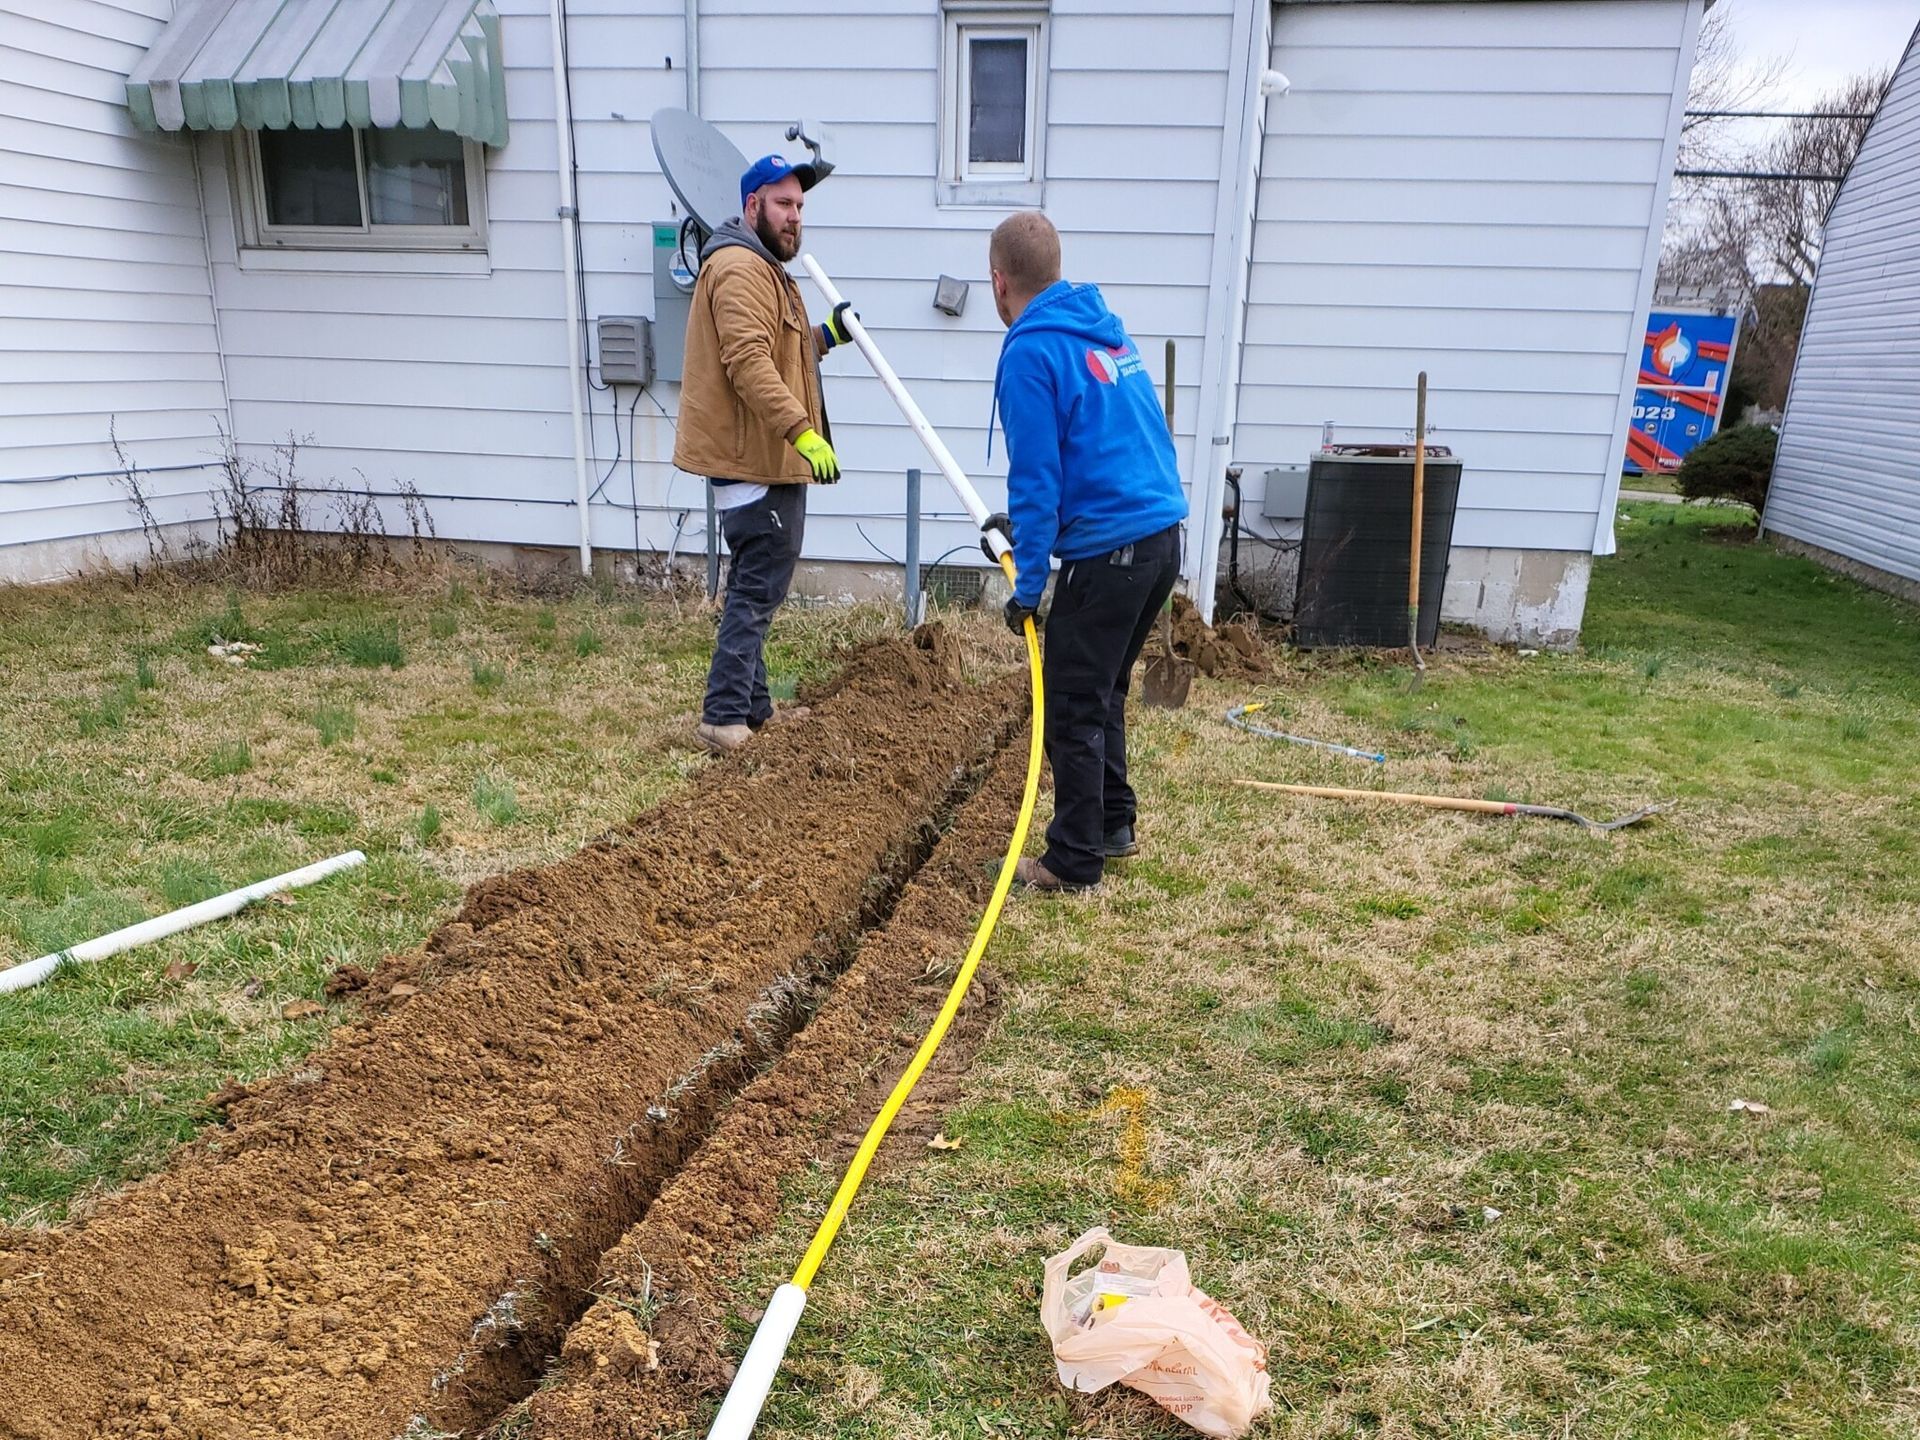 Two men are digging a hole in the ground in front of a house.